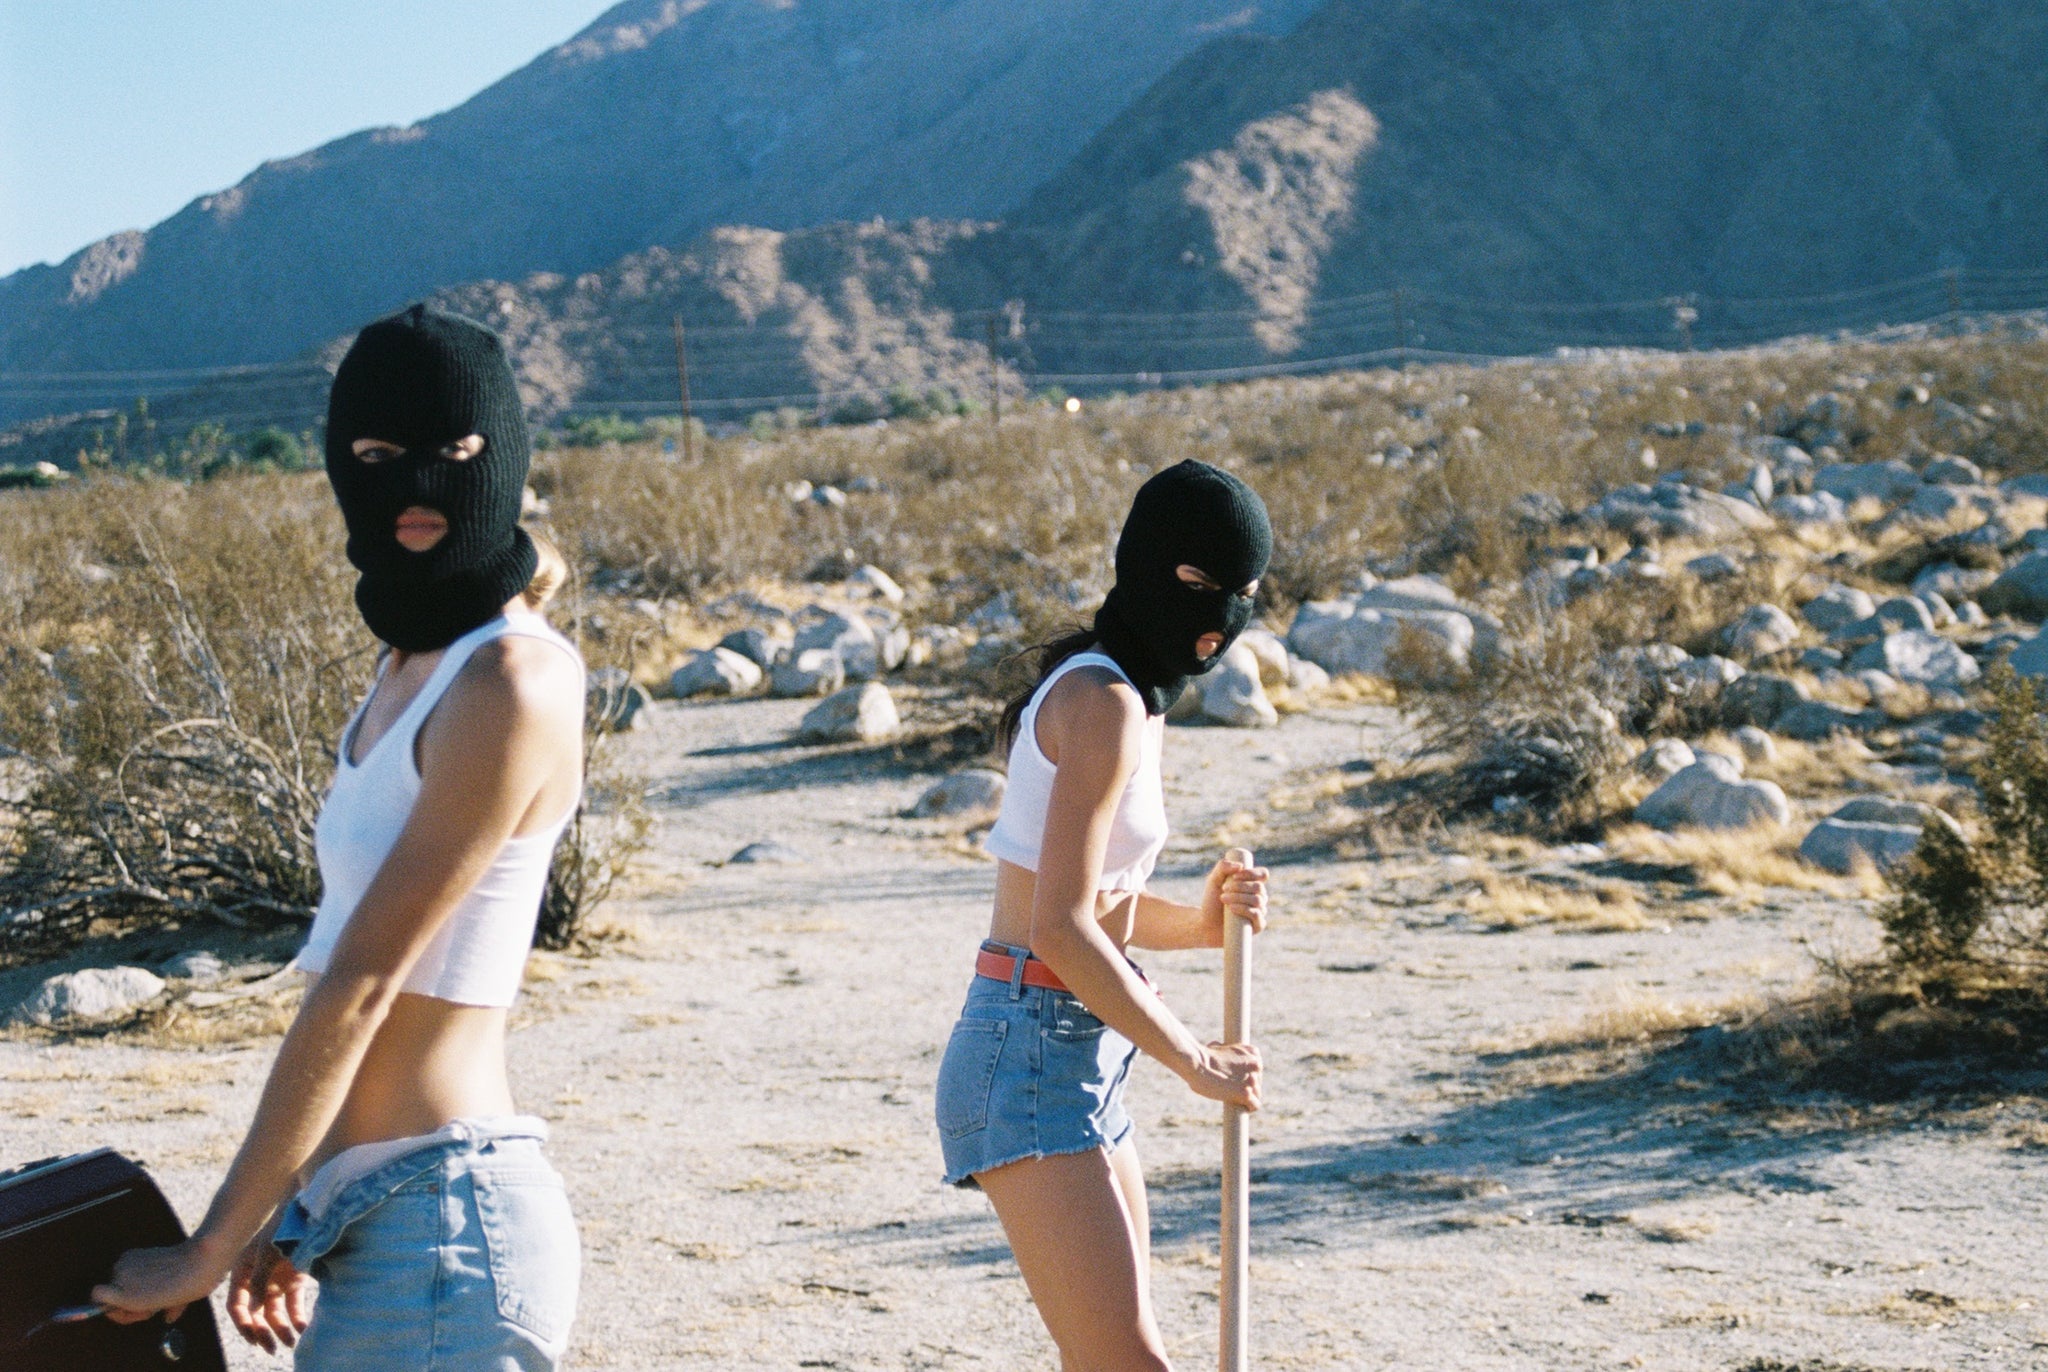 Thelma & Louise - Another Filthy Magazine - Photo 14